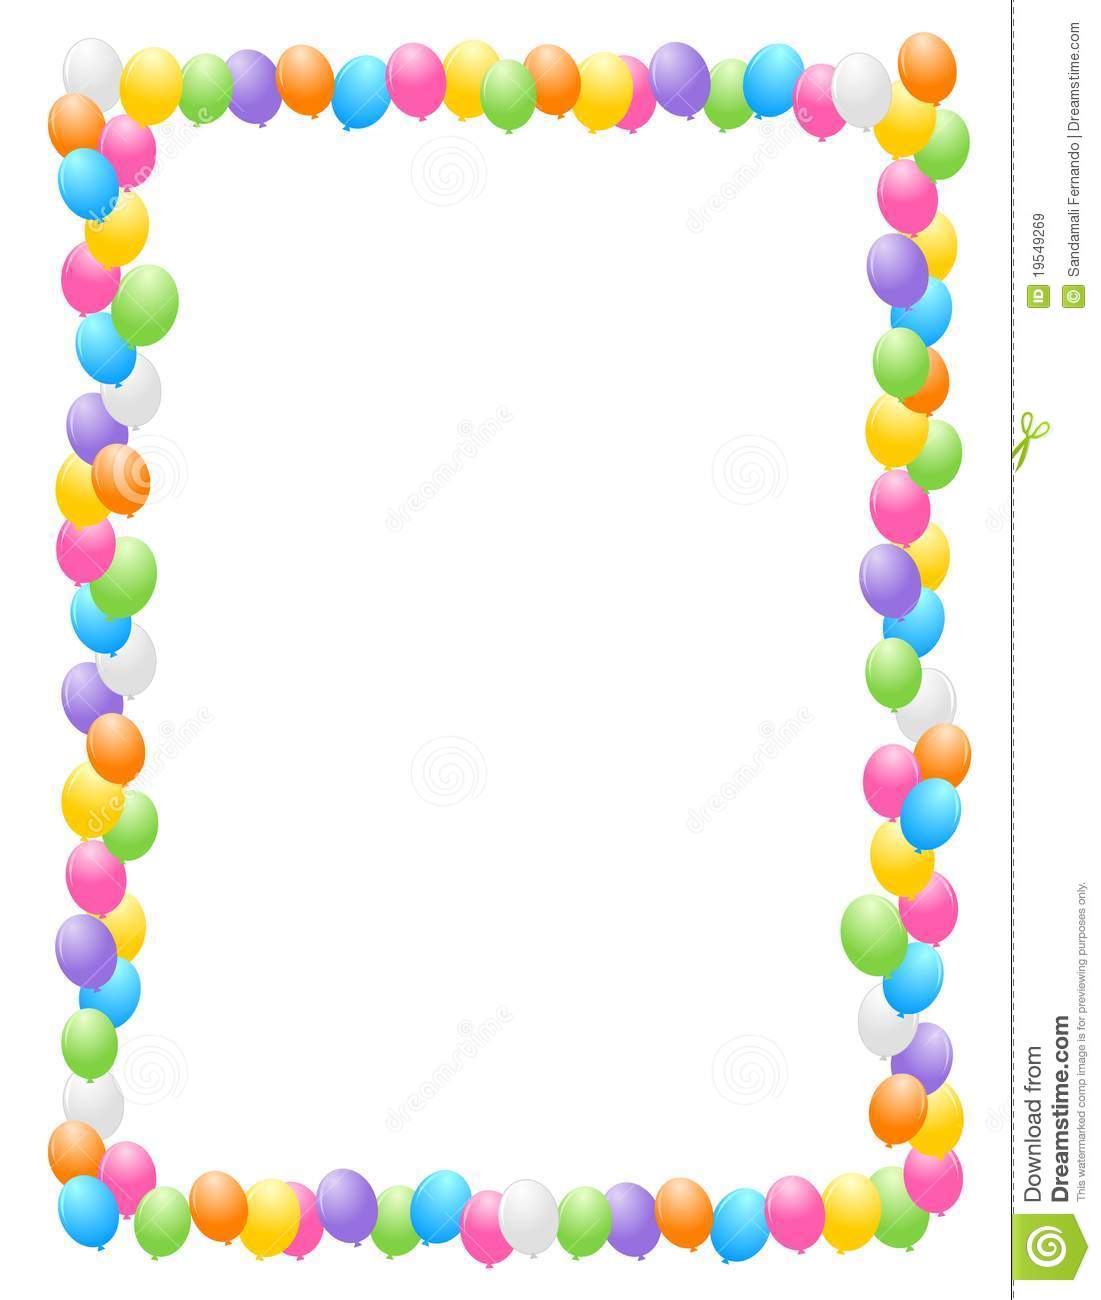 Border   Frame Illustration For Birthday Cards And Party Backgrounds